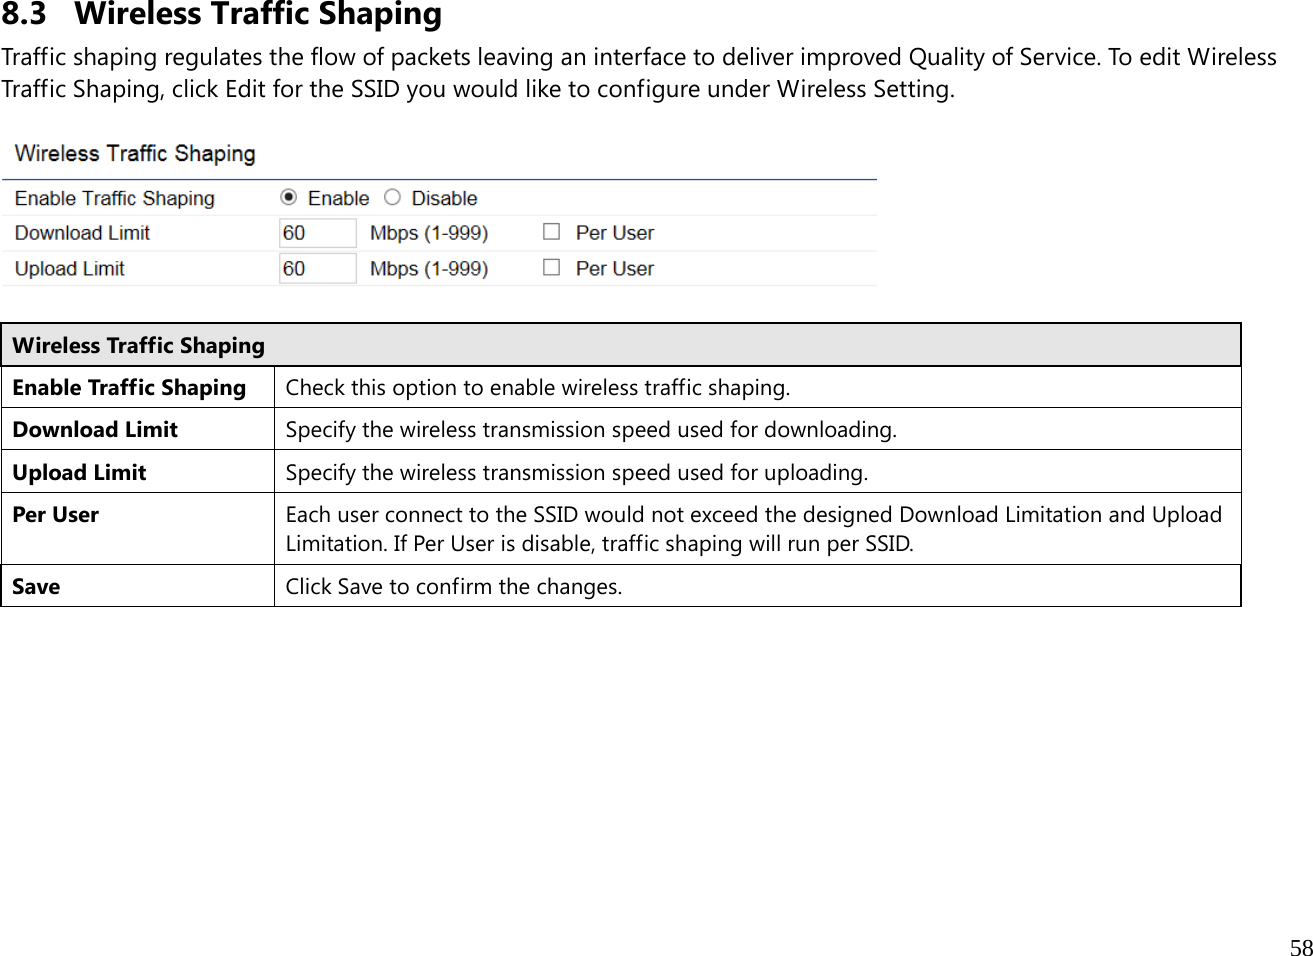  58  8.3 Wireless Traffic Shaping Traffic shaping regulates the flow of packets leaving an interface to deliver improved Quality of Service. To edit Wireless Traffic Shaping, click Edit for the SSID you would like to configure under Wireless Setting.    Wireless Traffic Shaping Enable Traffic Shaping  Check this option to enable wireless traffic shaping. Download Limit  Specify the wireless transmission speed used for downloading. Upload Limit  Specify the wireless transmission speed used for uploading.Per User  Each user connect to the SSID would not exceed the designed Download Limitation and Upload Limitation. If Per User is disable, traffic shaping will run per SSID. Save Click Save to confirm the changes.  